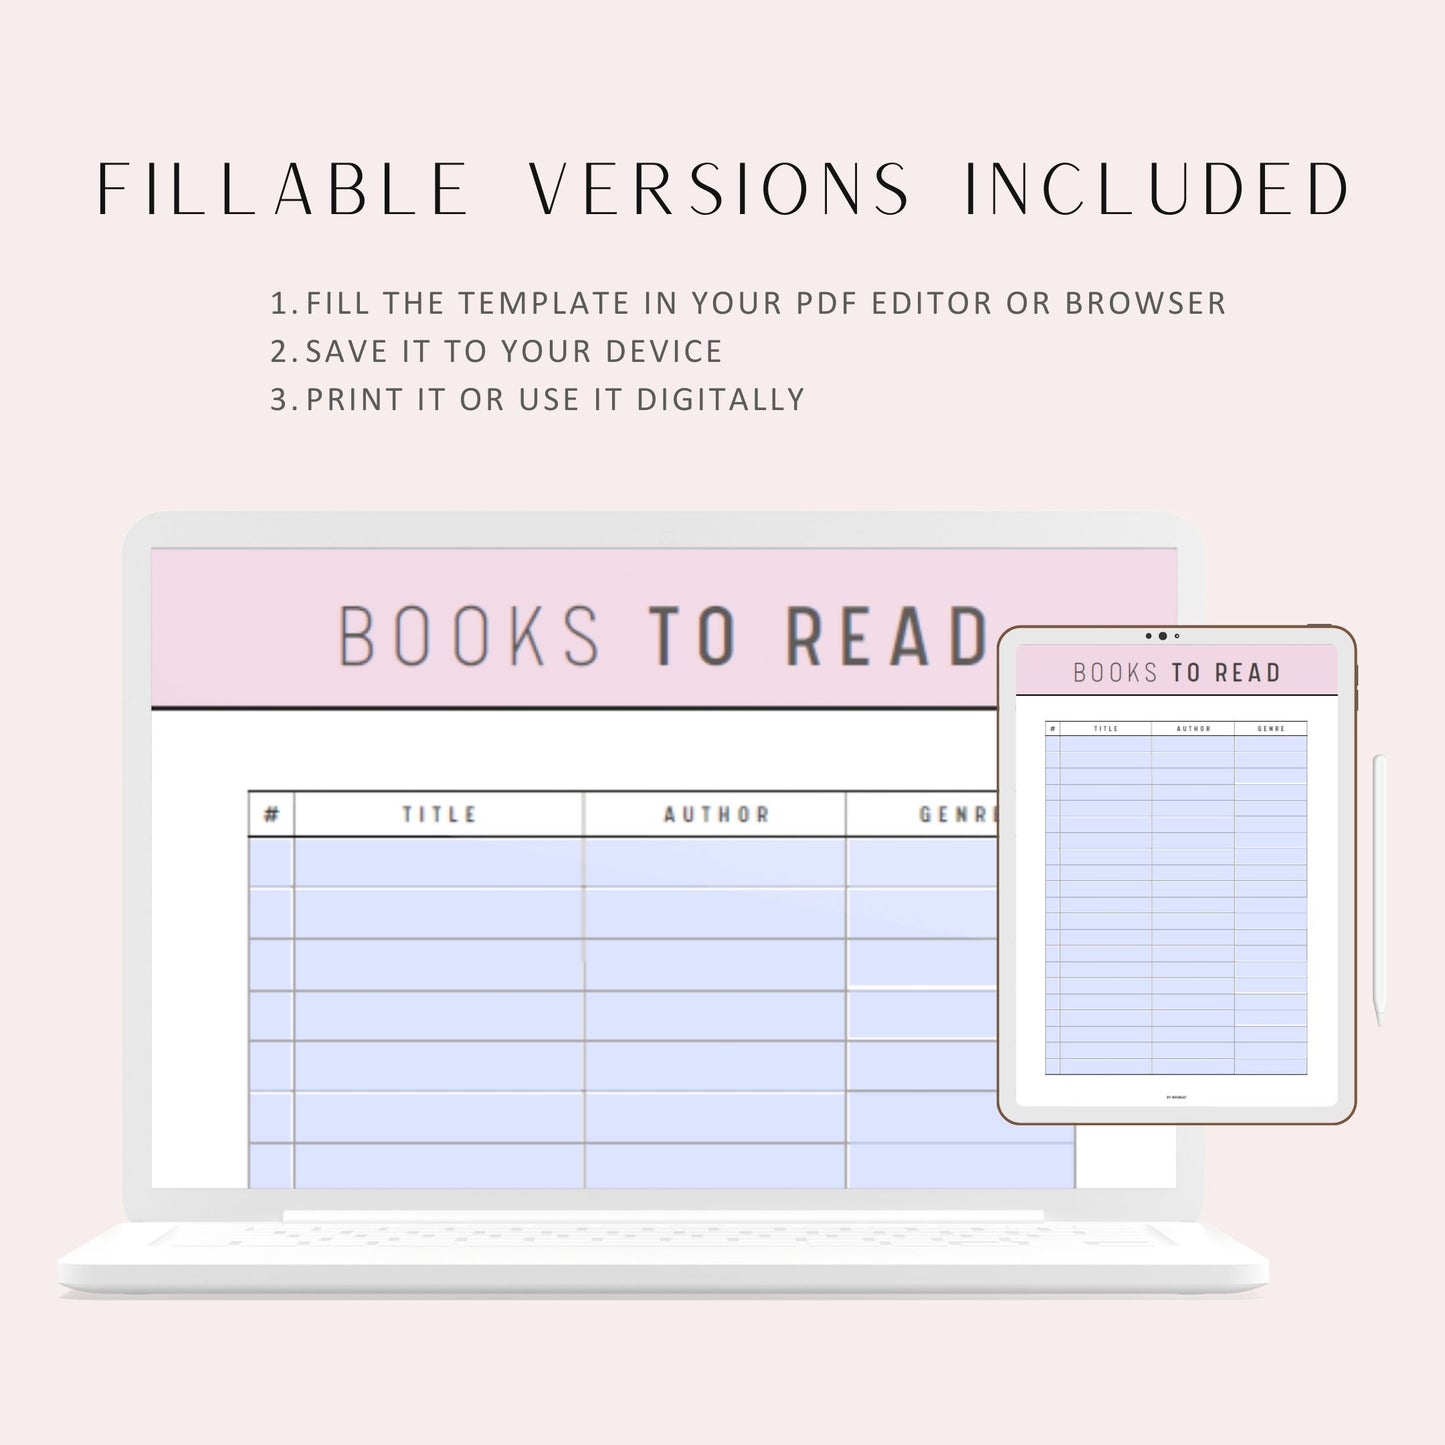 Books to Read List Template Printable, A4, A5, Letter, Half Letter, Digital Book Planner, Fillable Book Planner, 5 colors, beautiful and colorful planner